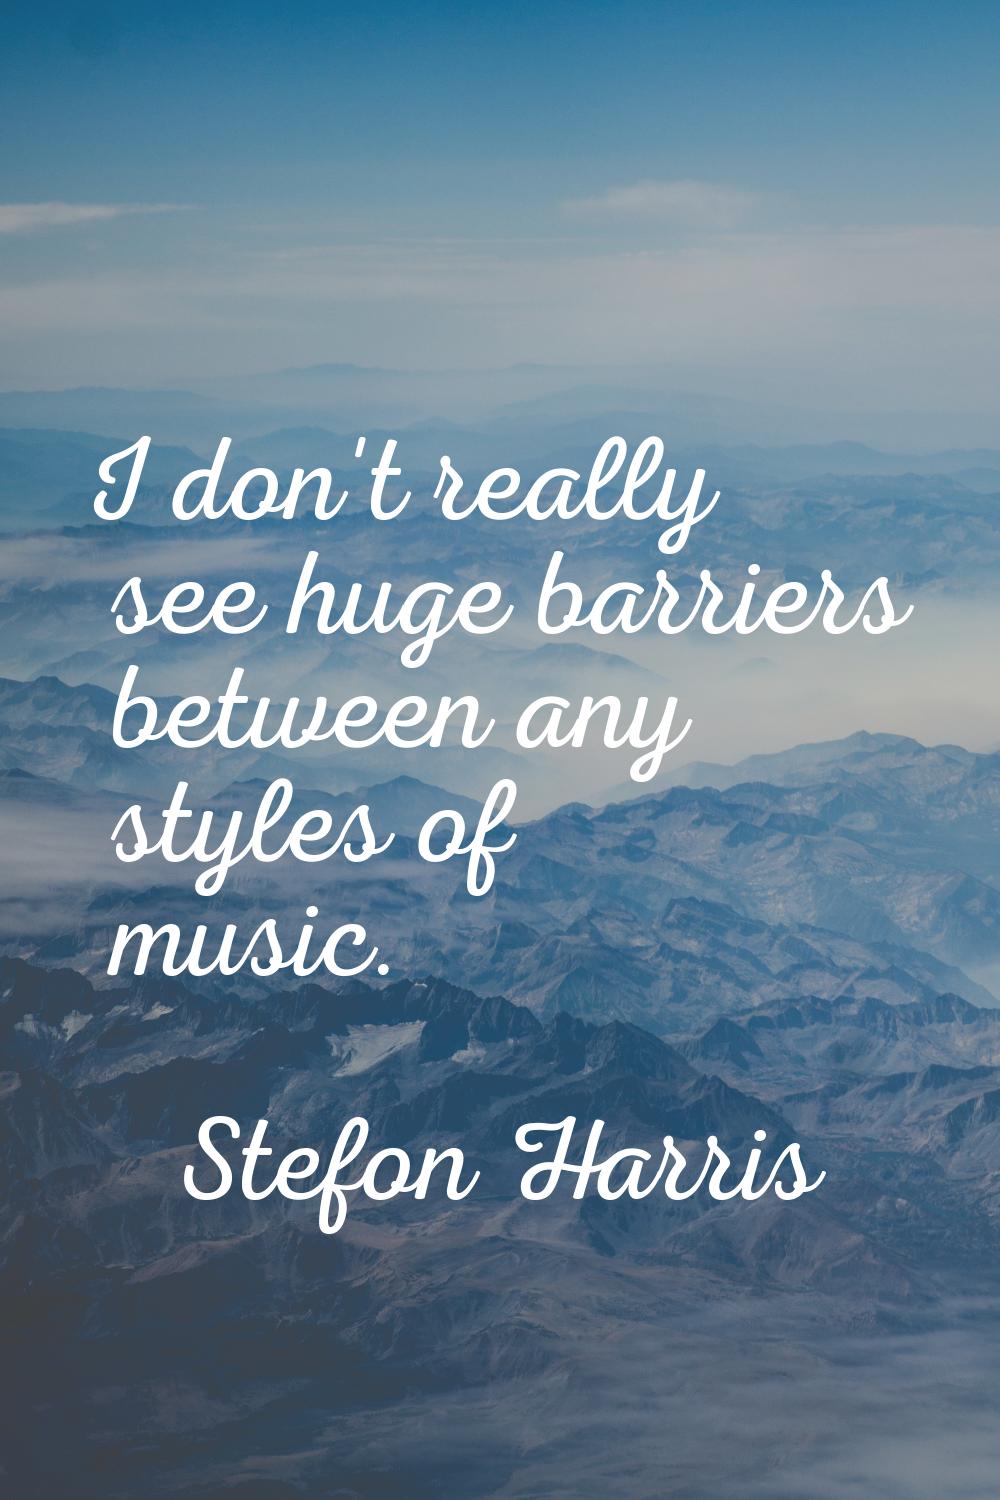 I don't really see huge barriers between any styles of music.